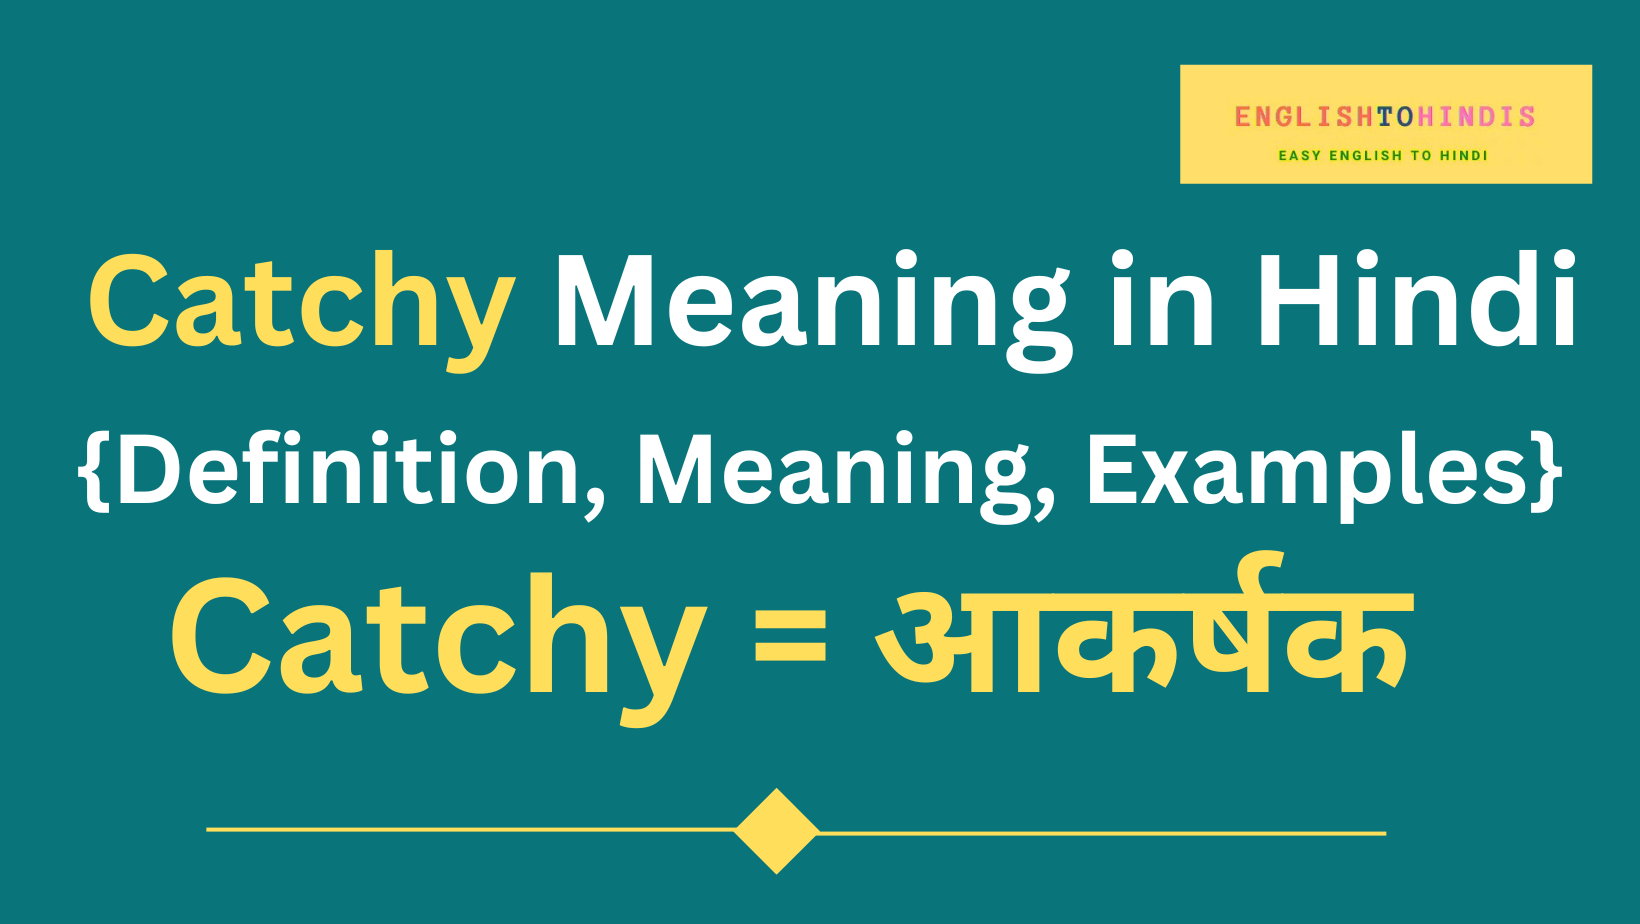 Catchy Meaning in Hindi